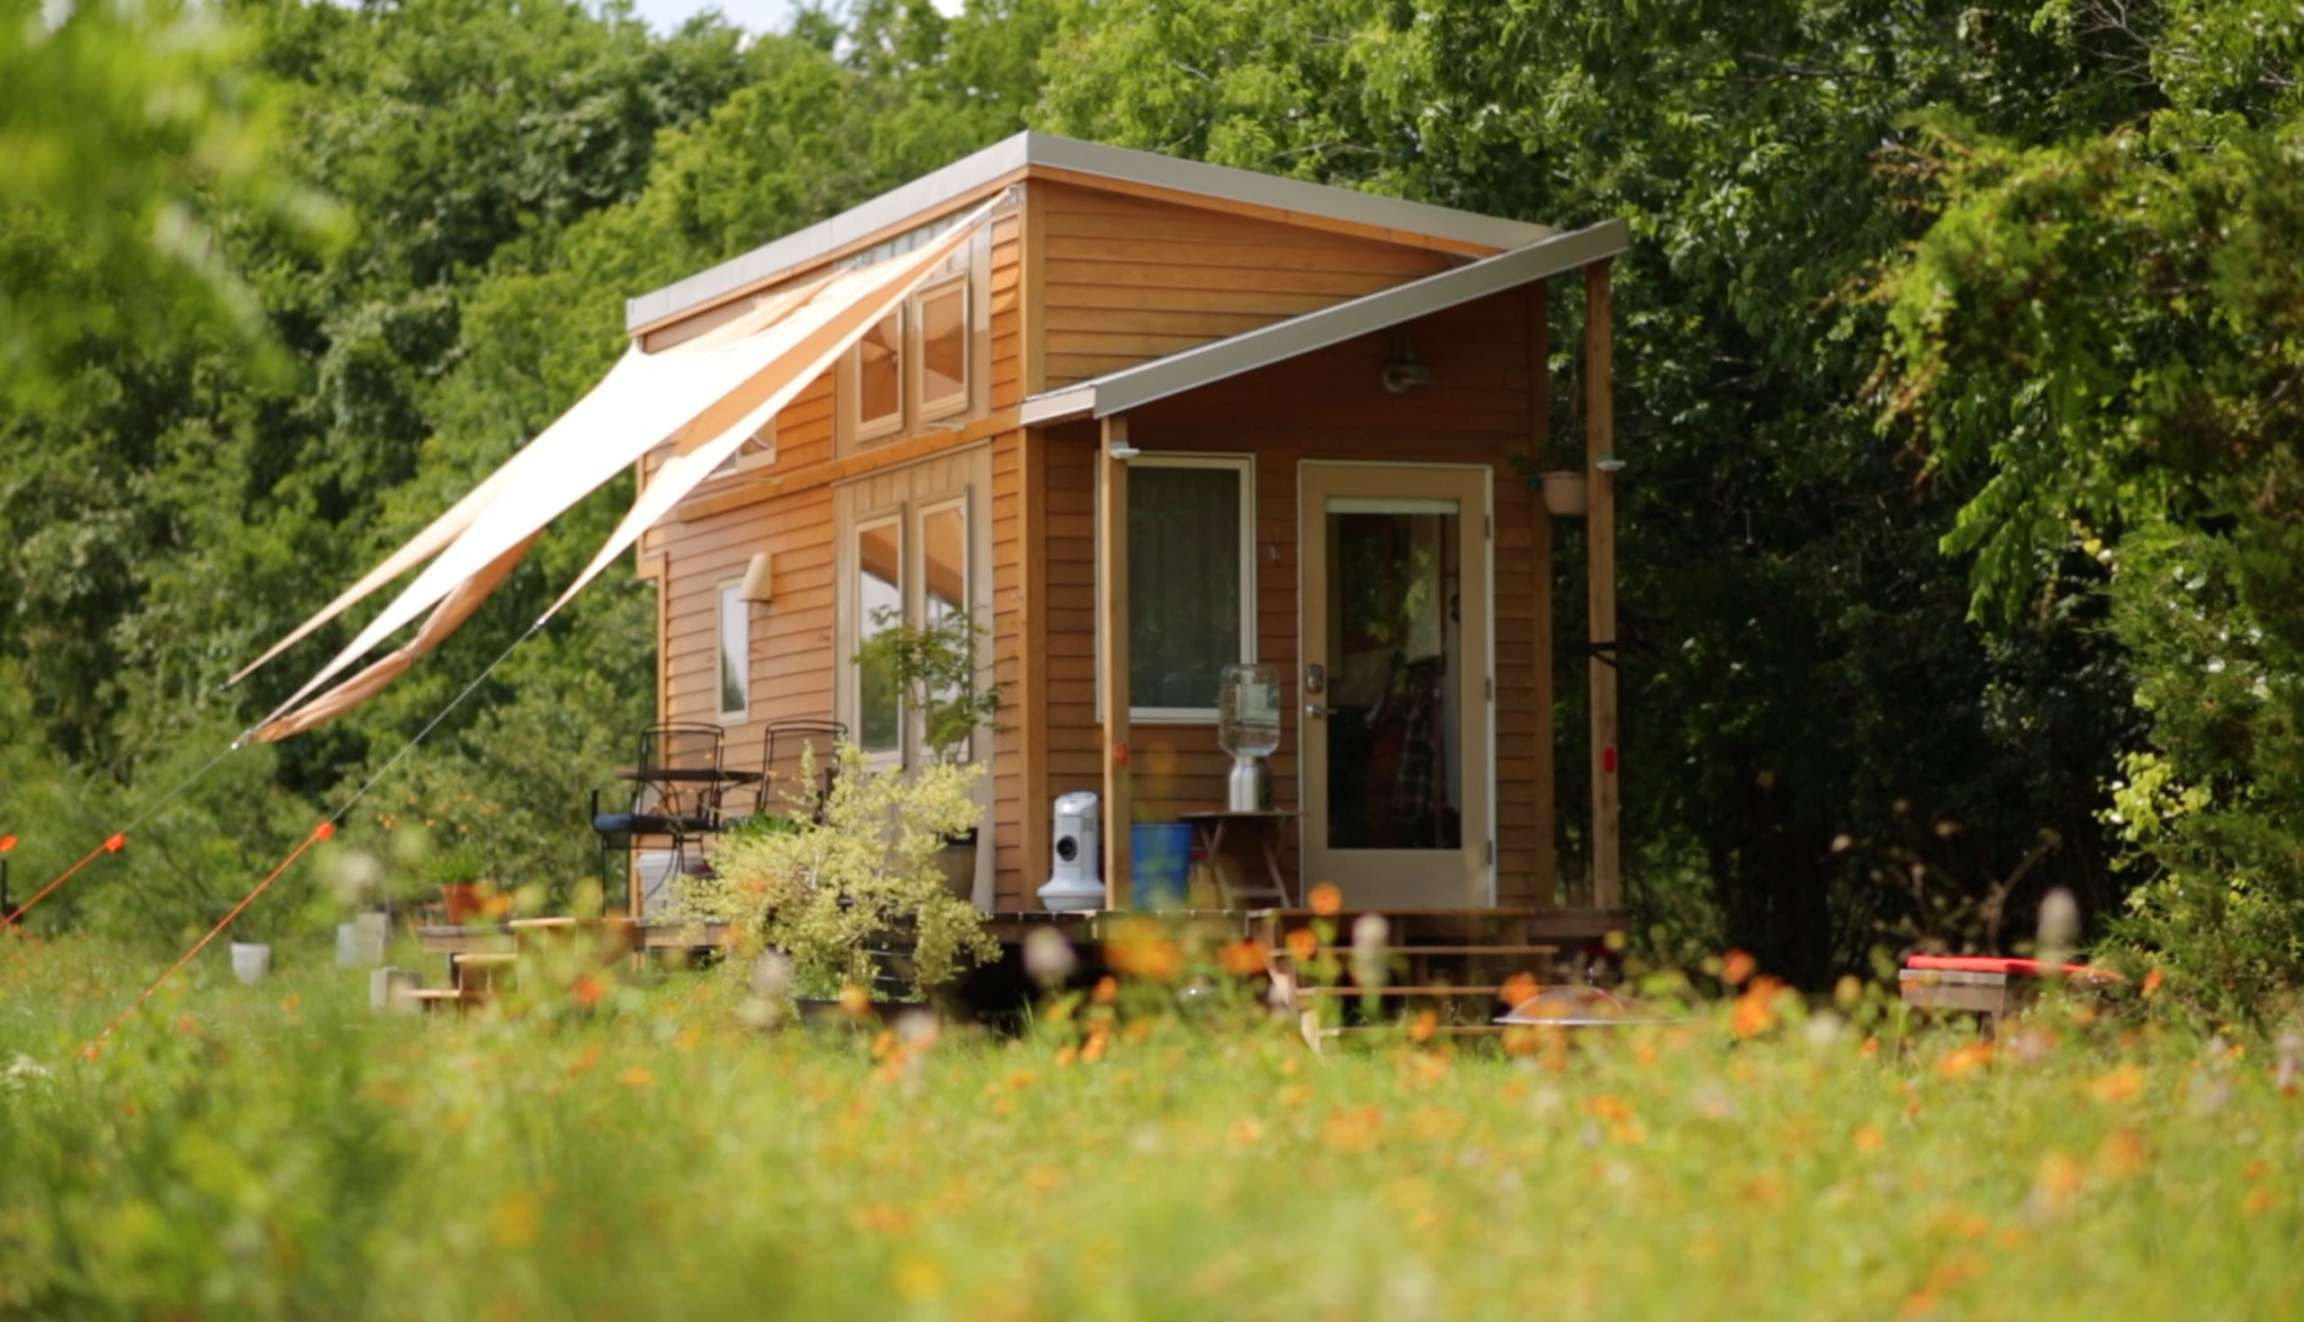 Create An Outdoor Oasis: Tiny House Landscaping & Patio Ideas